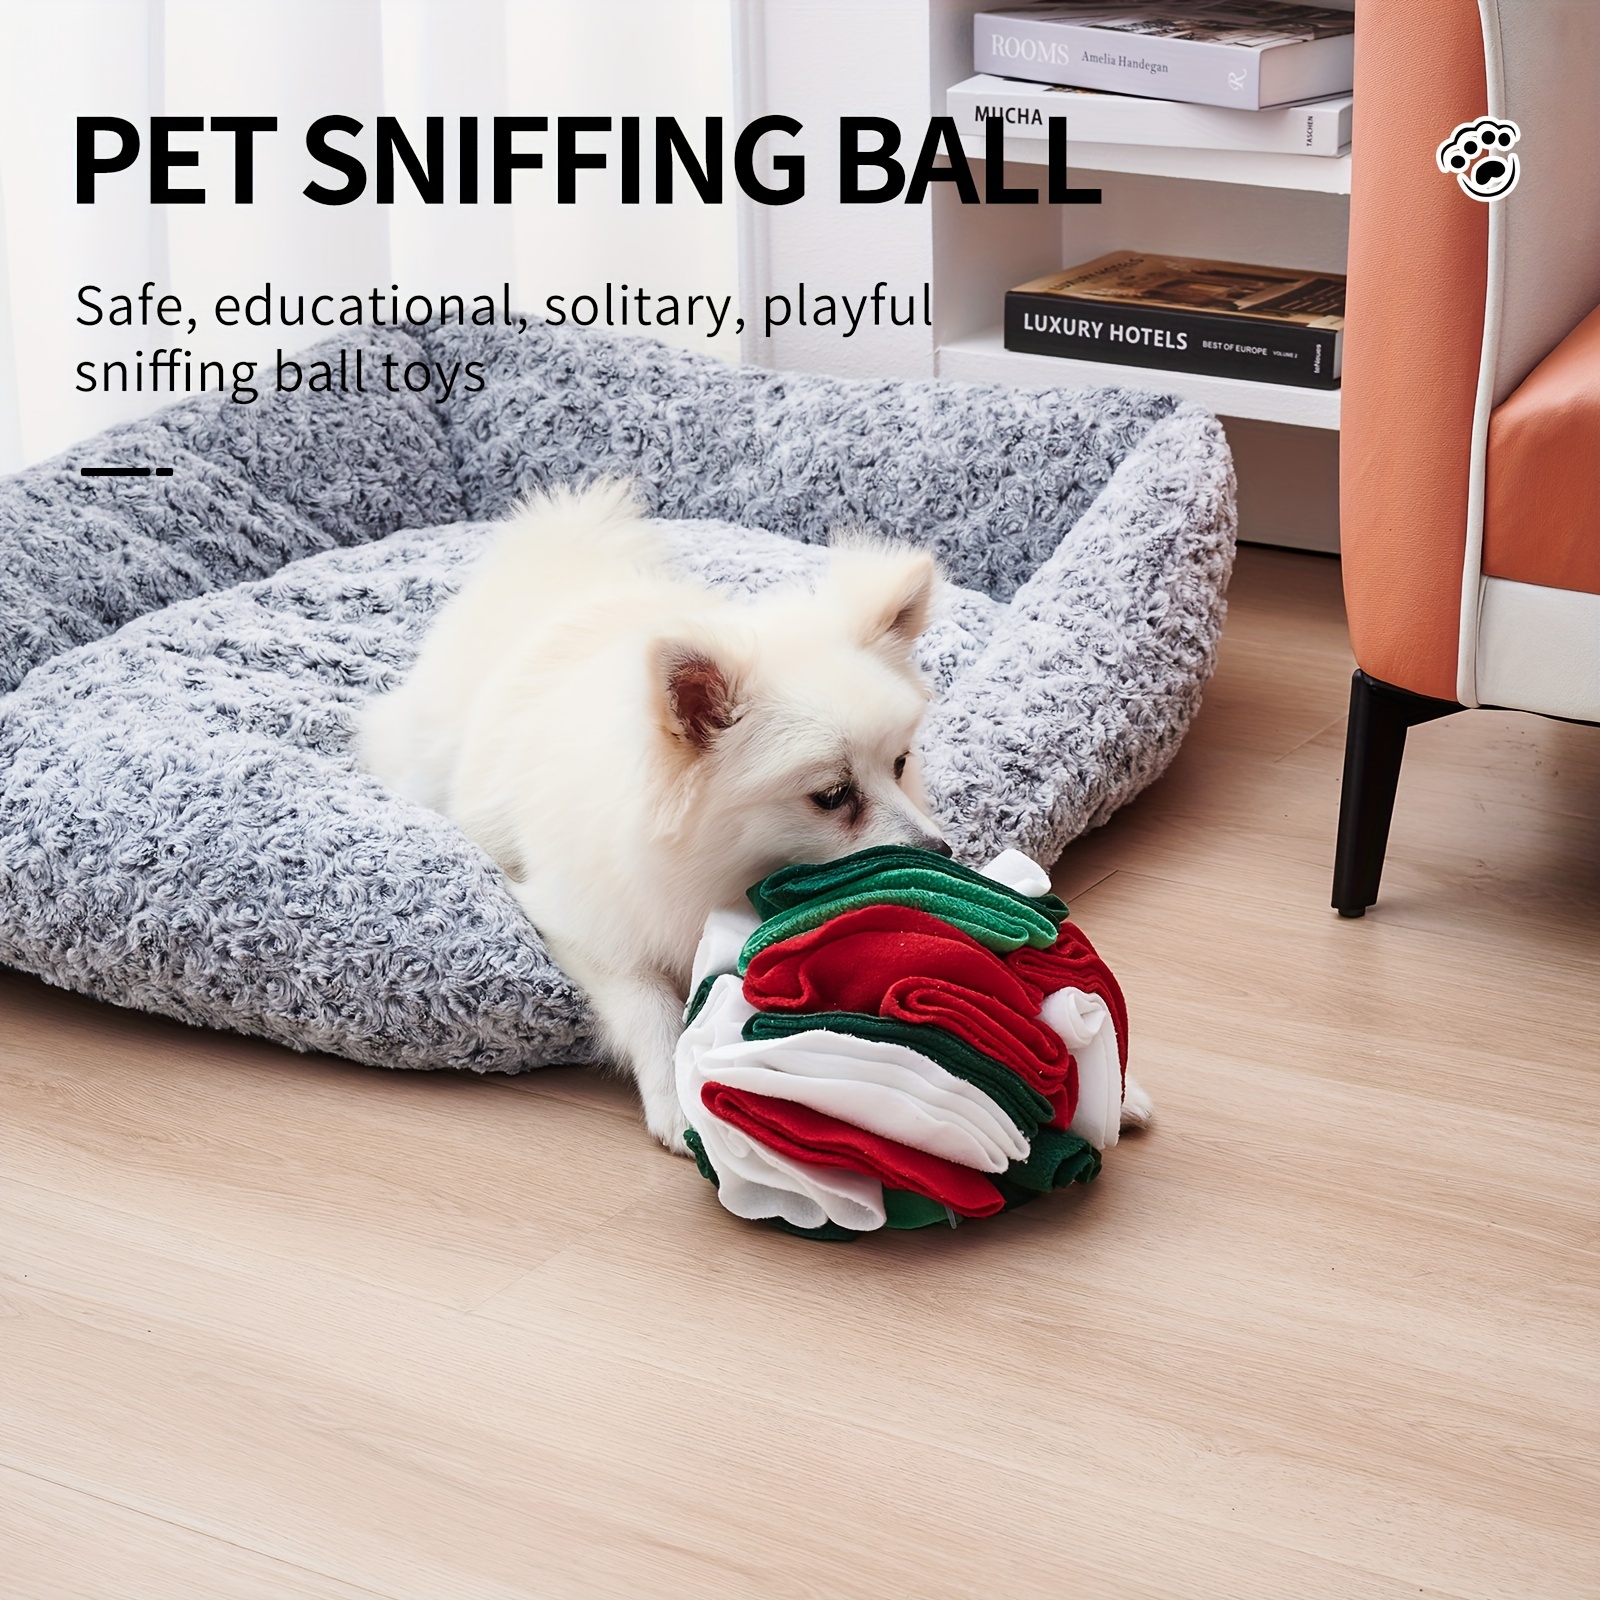 No-Sew Snuffle Ball for Dogs FREE Tutorial